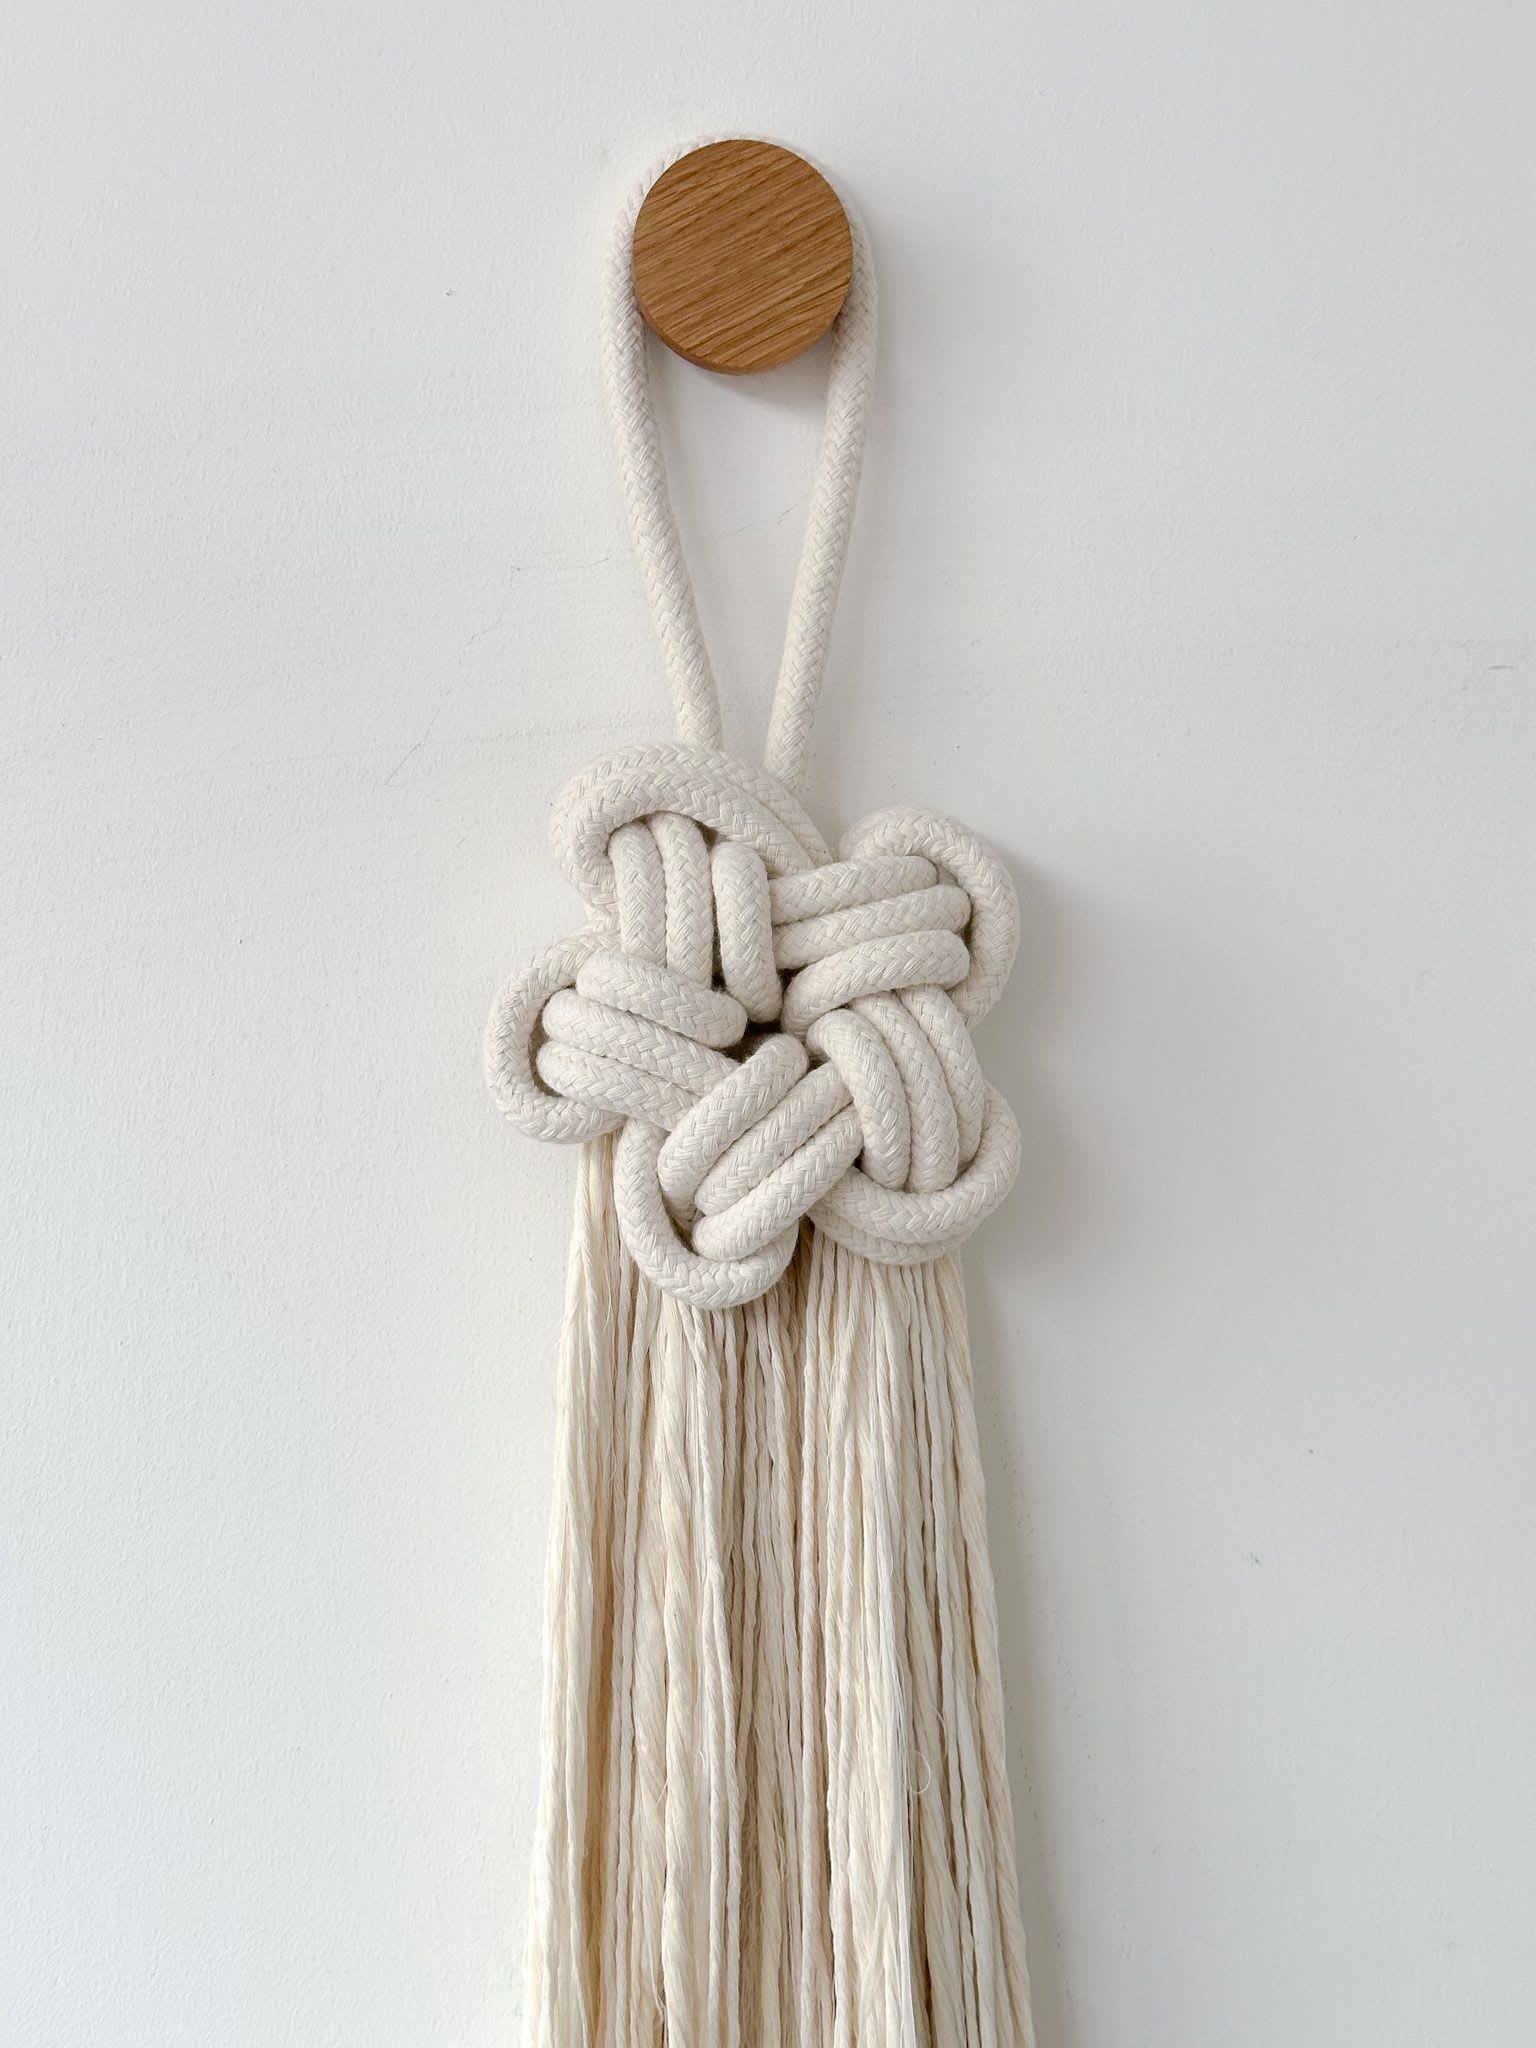 KNOT 005 | Rope Sculpture Wall Hanging